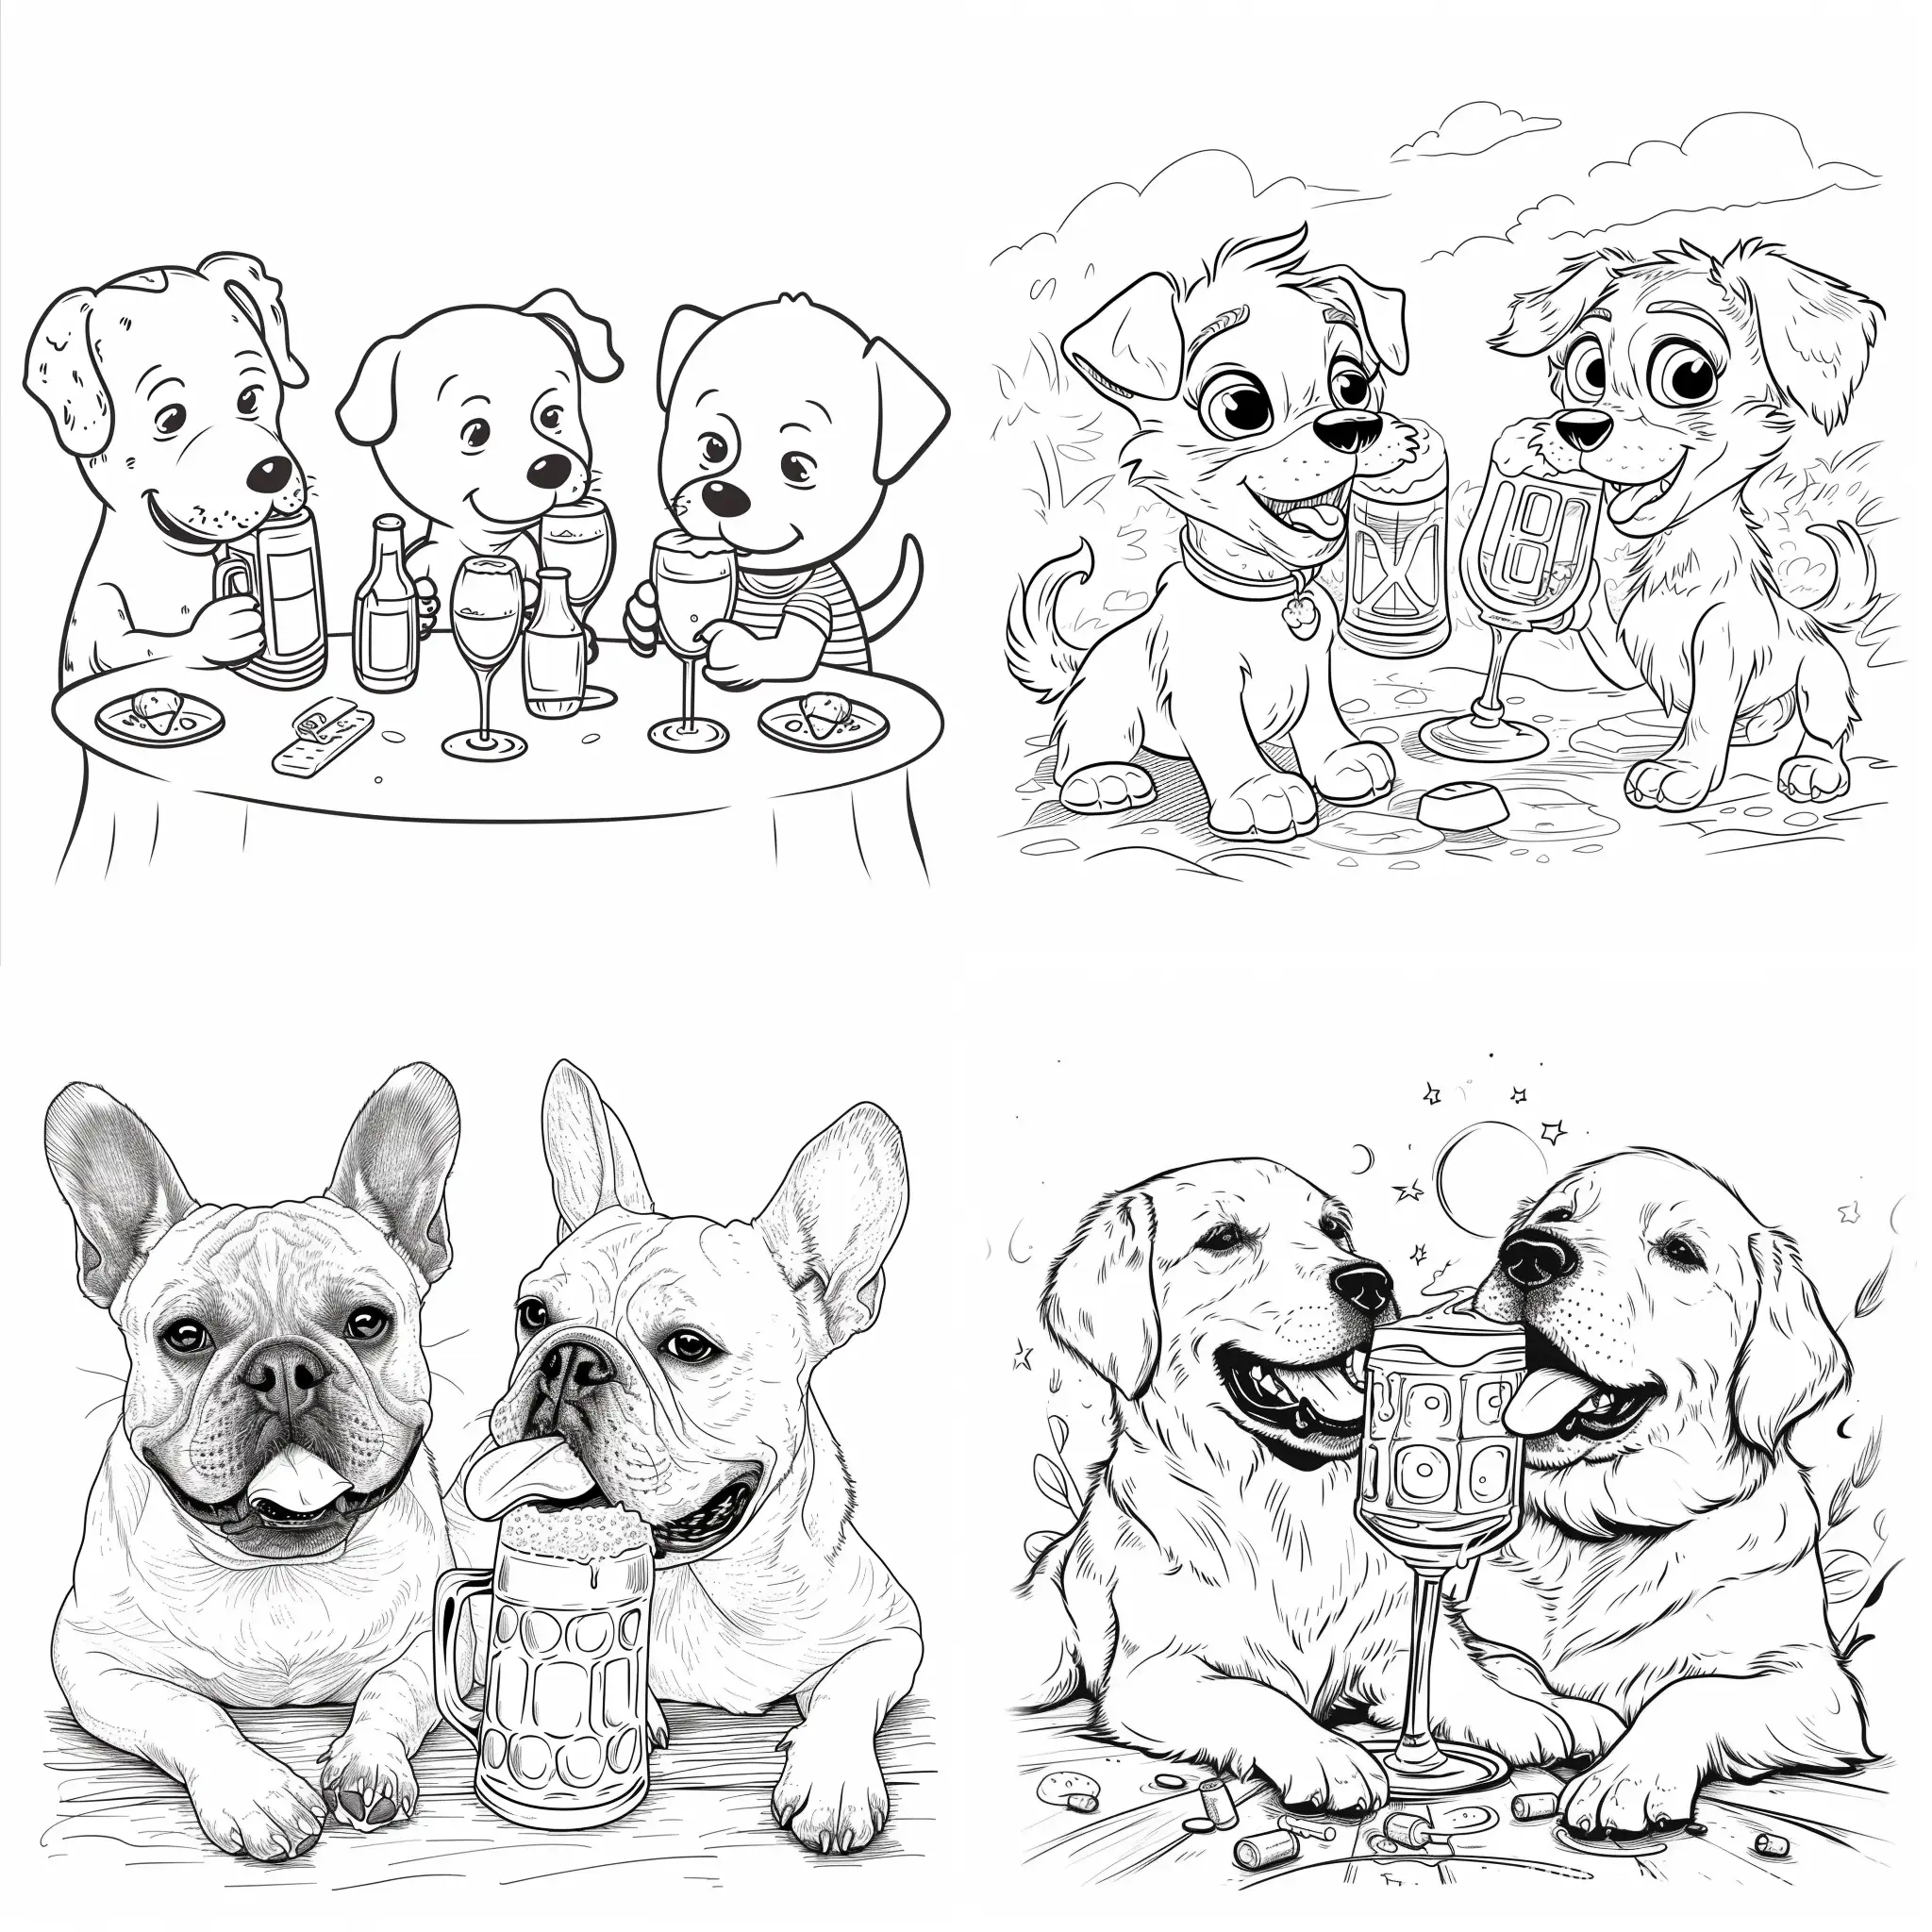 draw a simple, minimalistic coloring book for three year olds. dogs drink beer and wine. The coloring book should have few details so that the child can cope with it